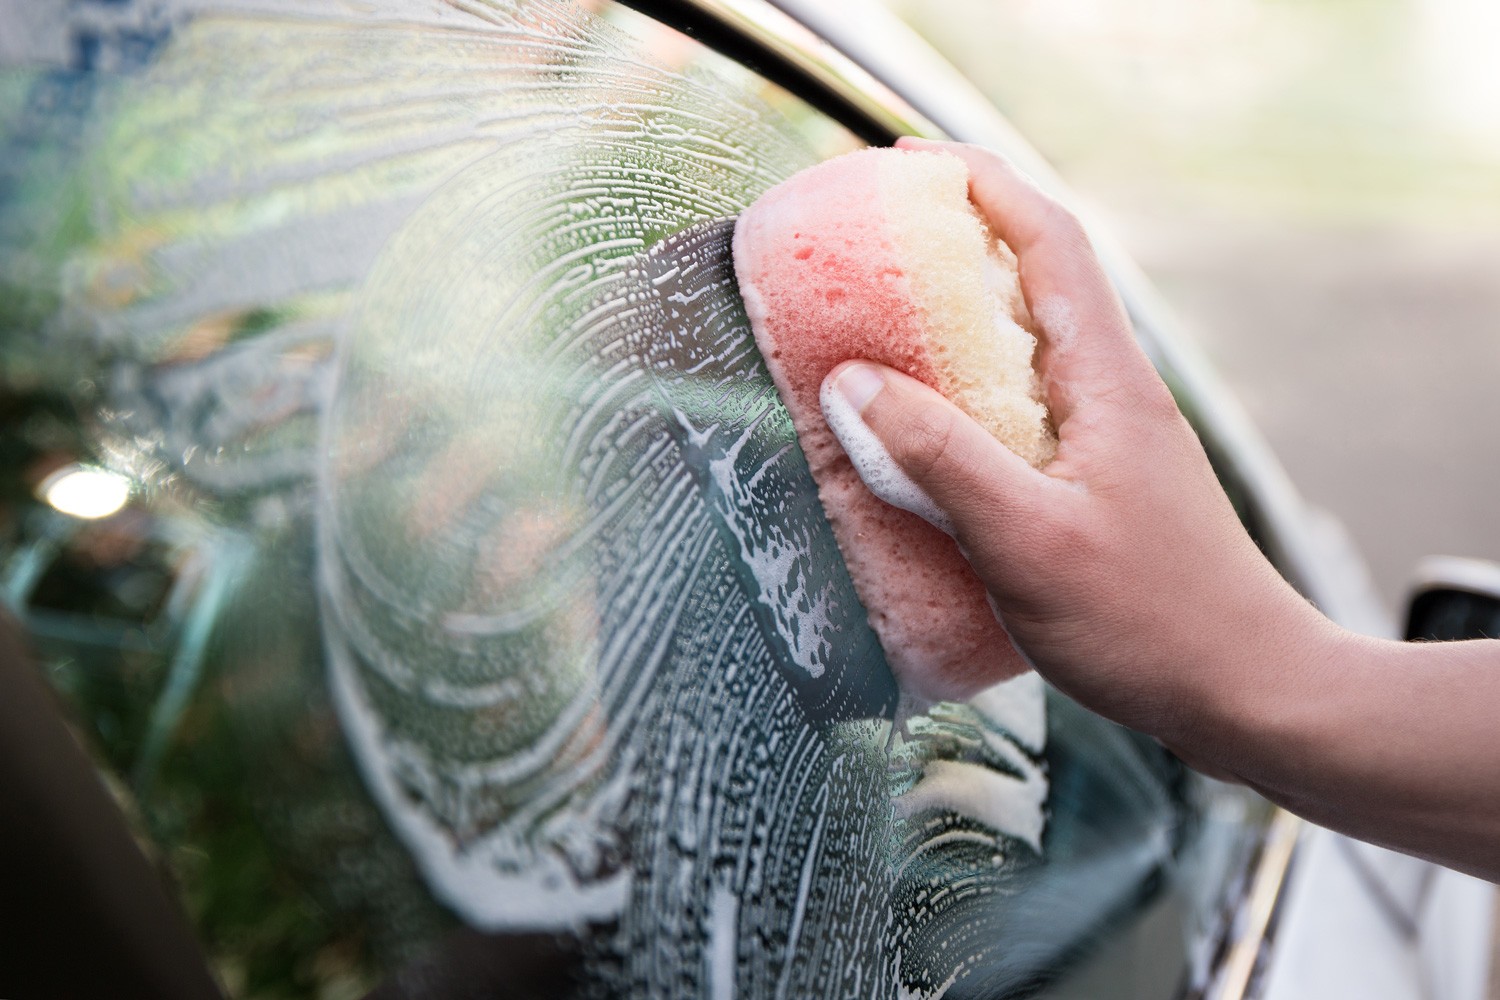 handle car wash concept - close up of male hand holding sponge and washing car window